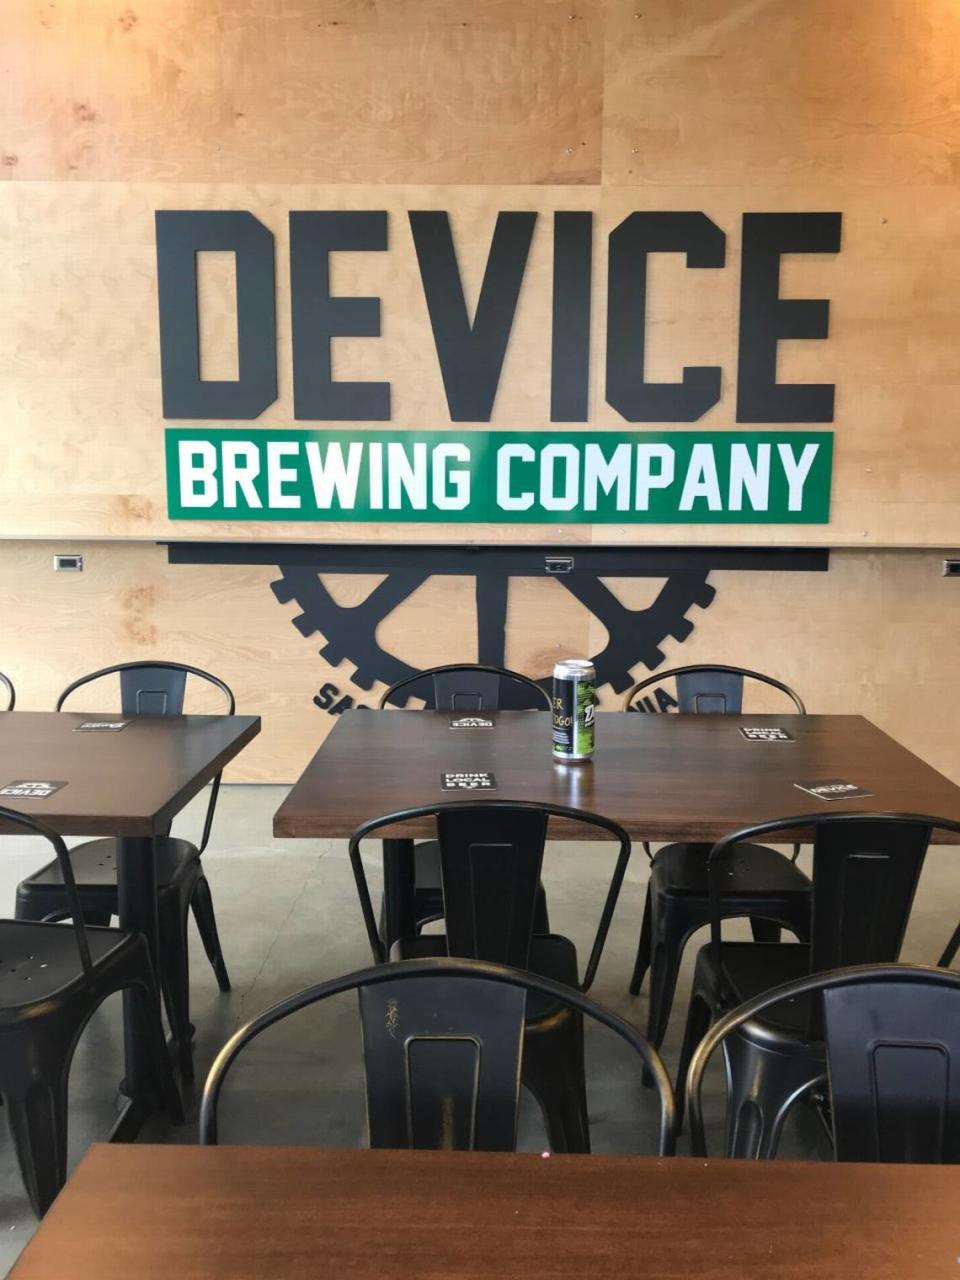 Device Brewing operates three tasting rooms in the city of Sacramento.